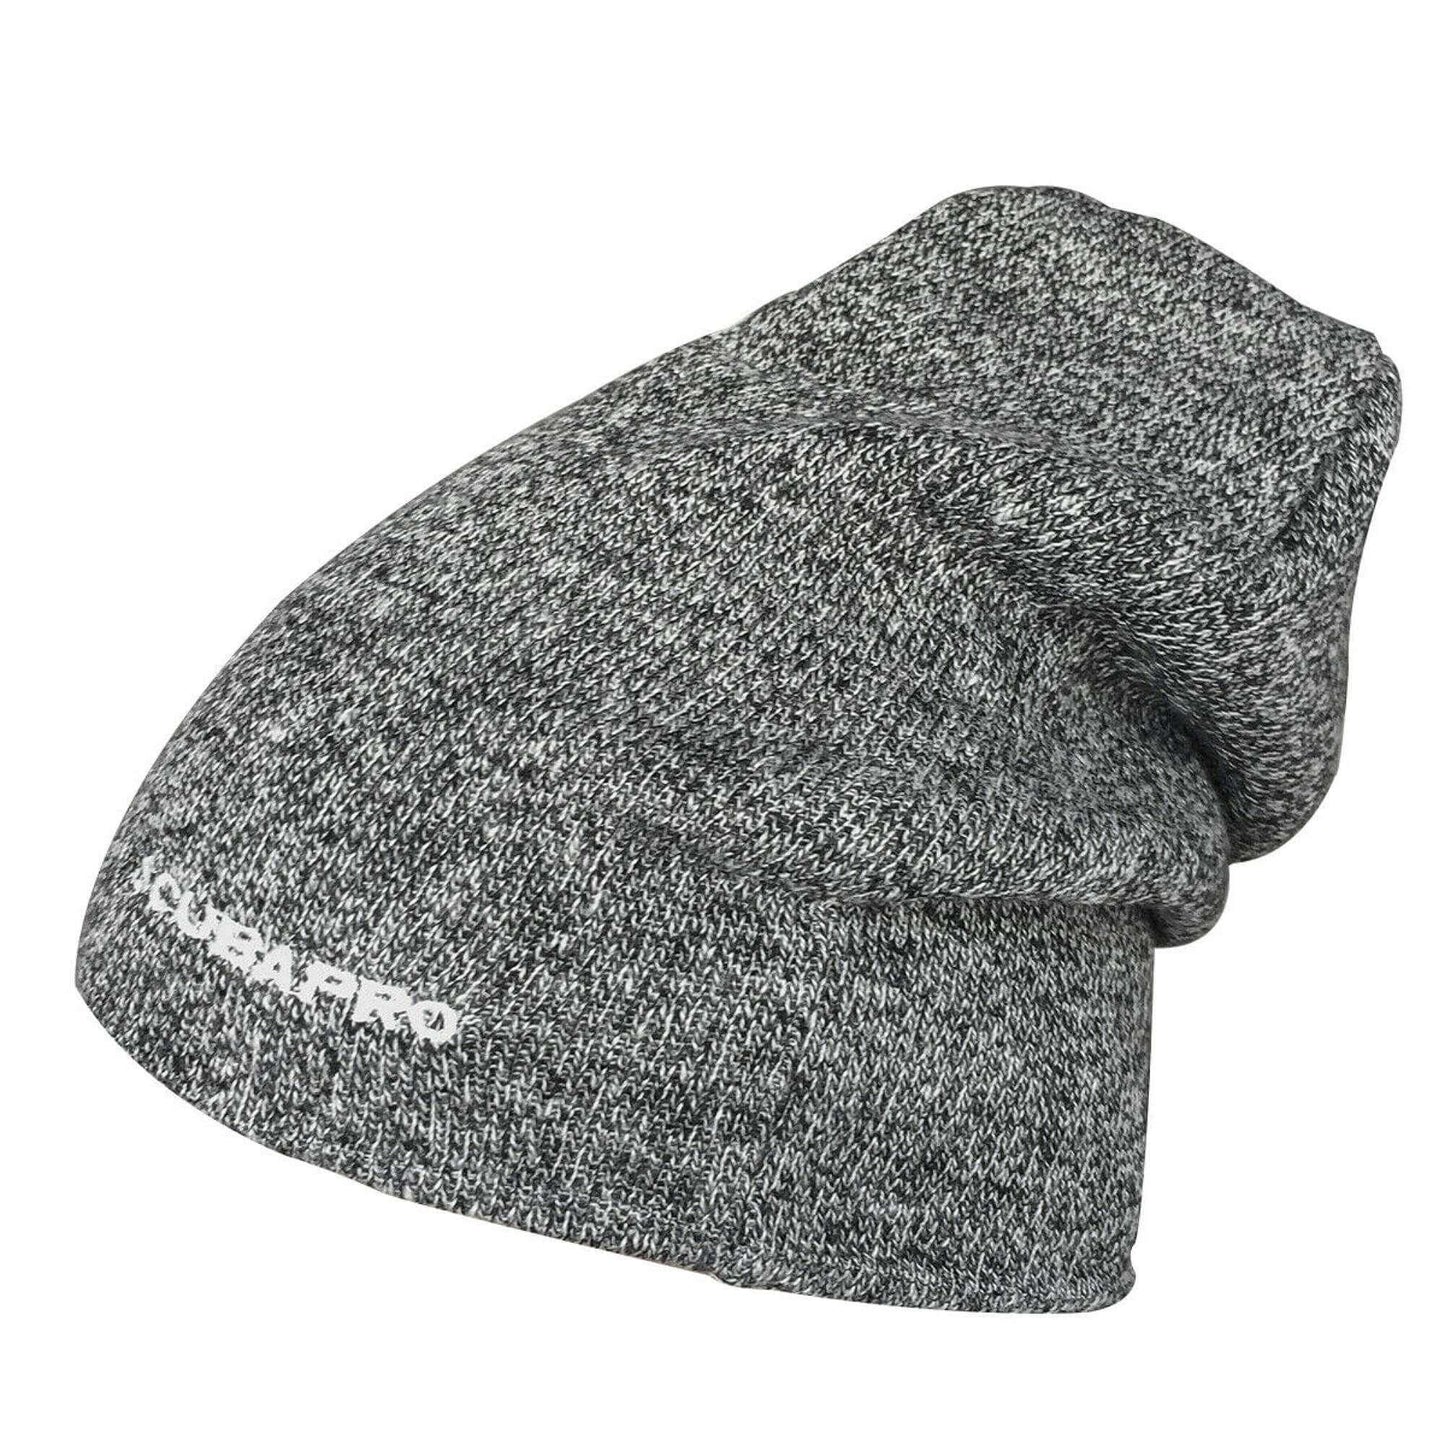 Scubapro Knitted Beanie Hat